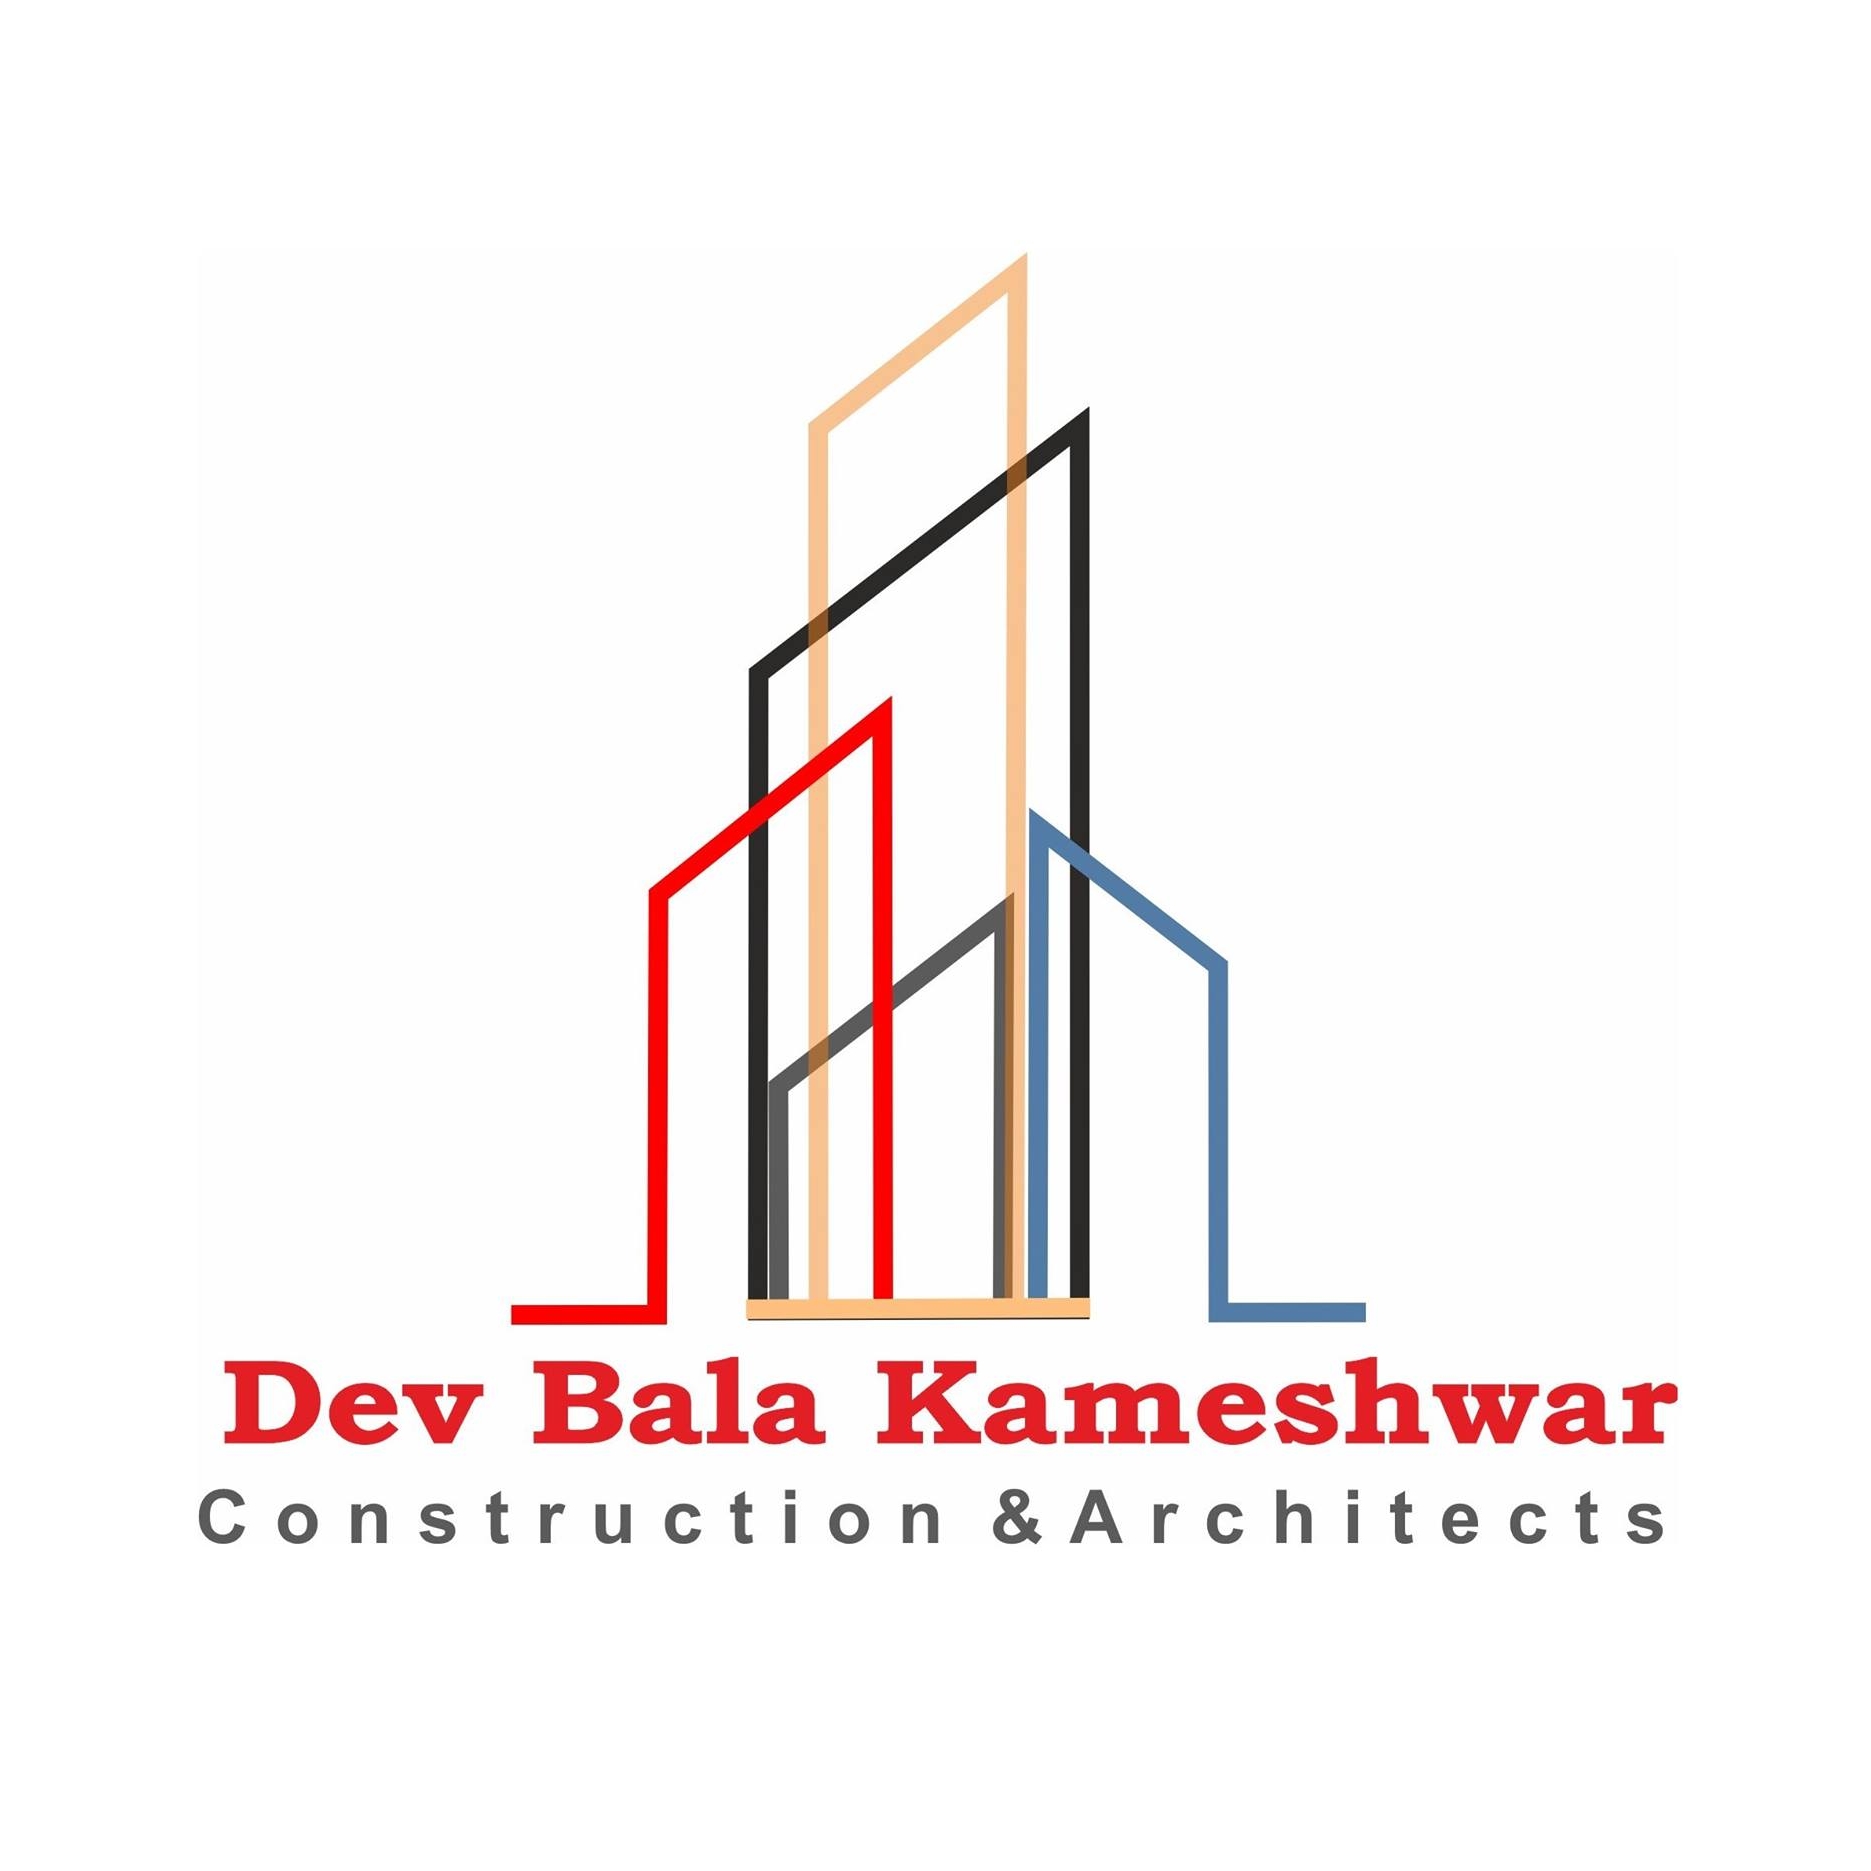 Dev Bala Kameshwar Construction and Architects|IT Services|Professional Services